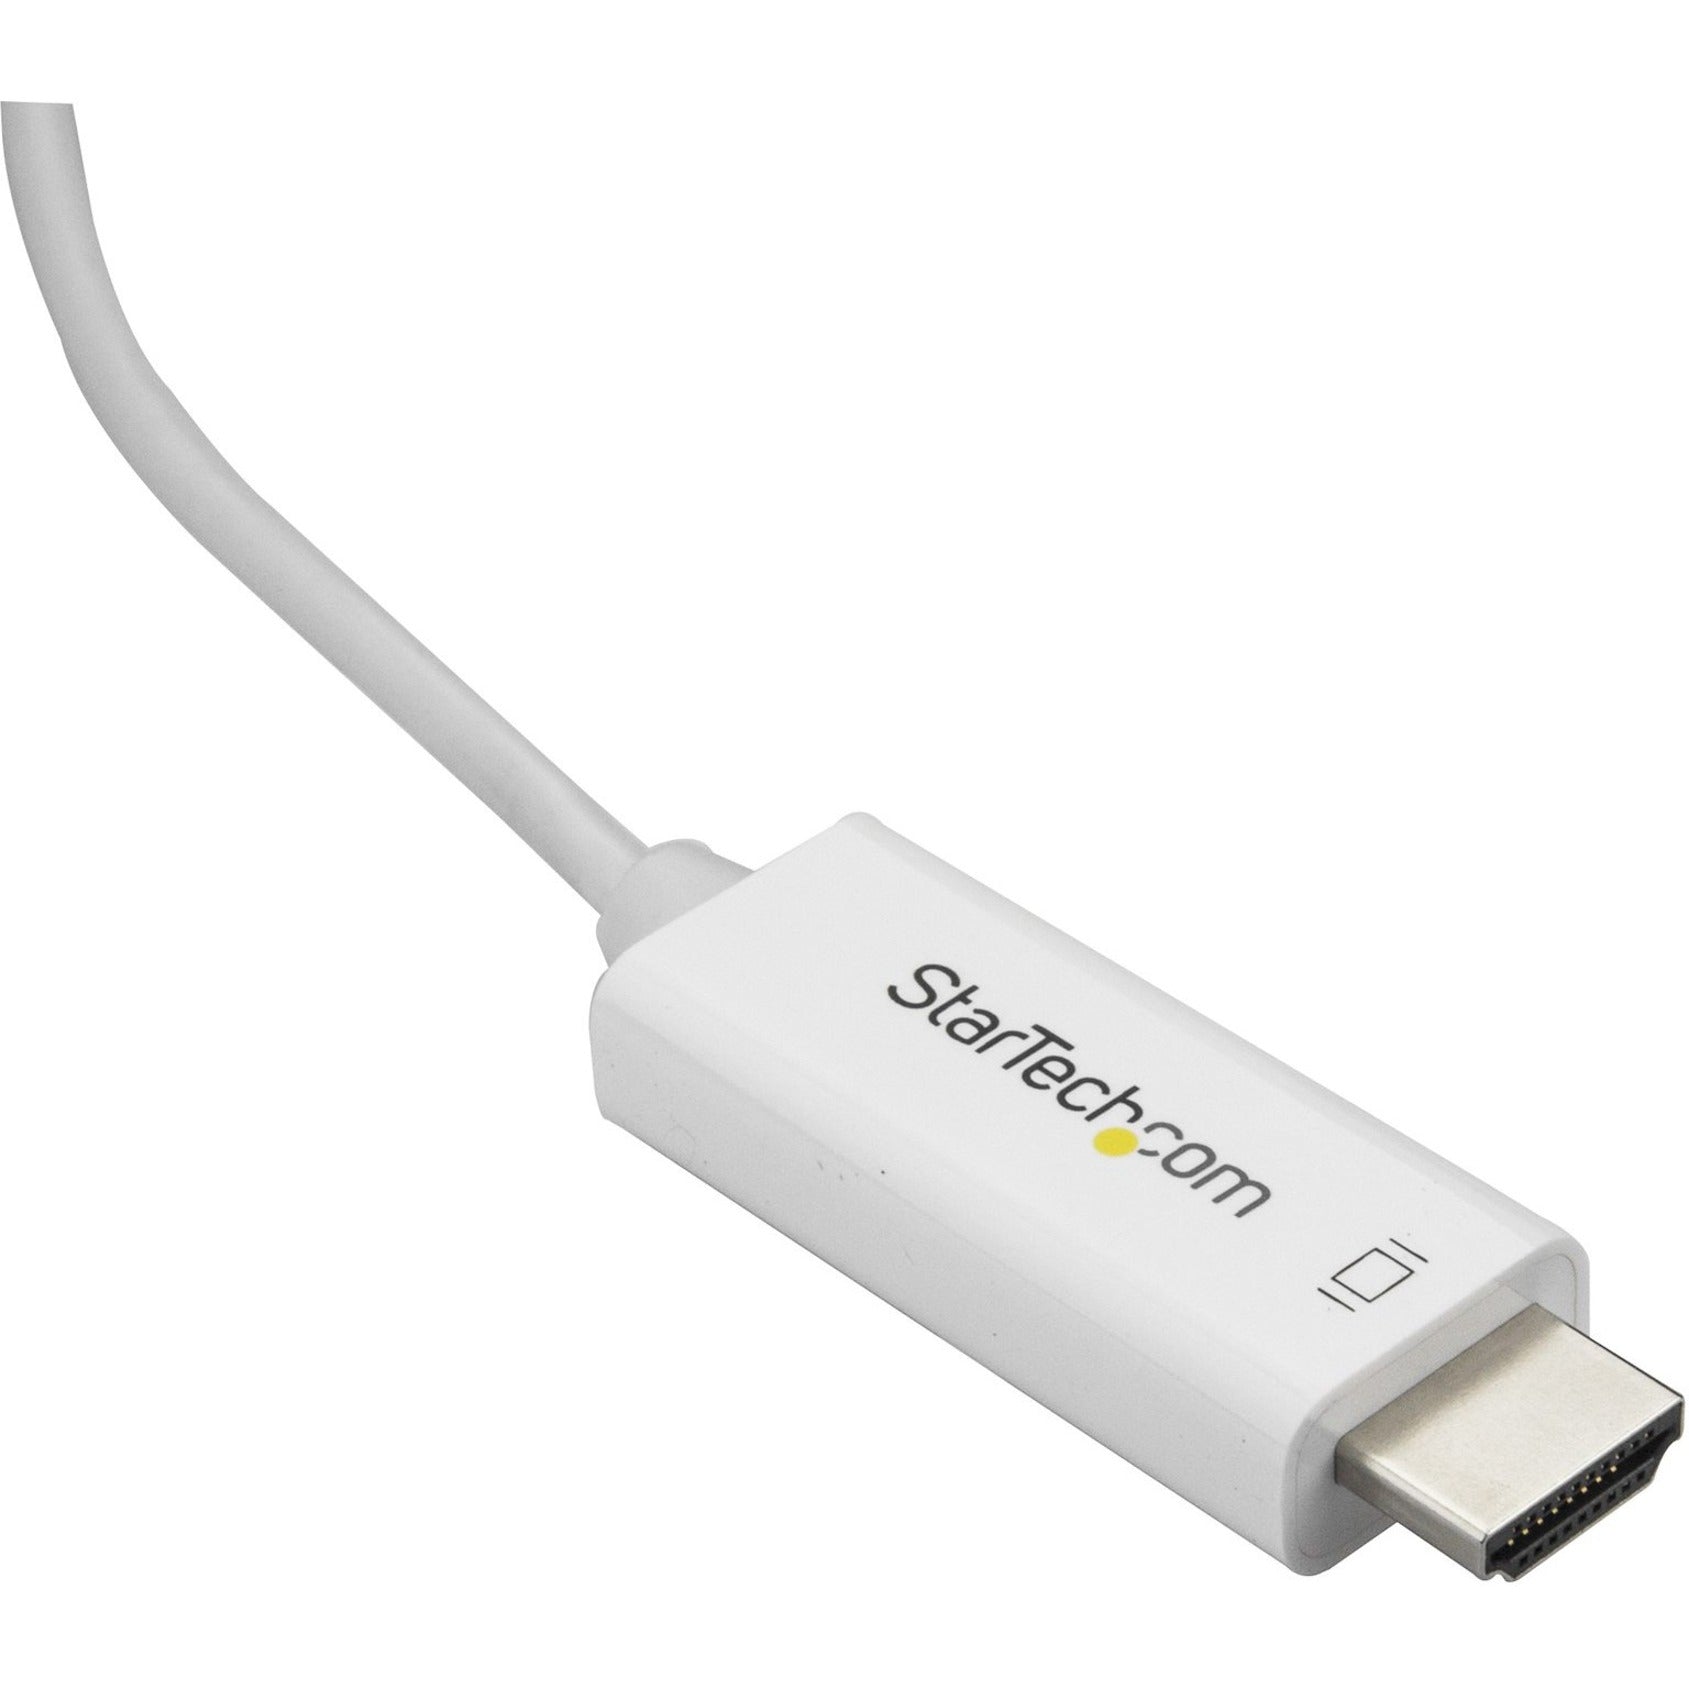 StarTech.com CDP2HD2MWNL 2m USB-C to HDMI Cable - 4K at 60Hz, White